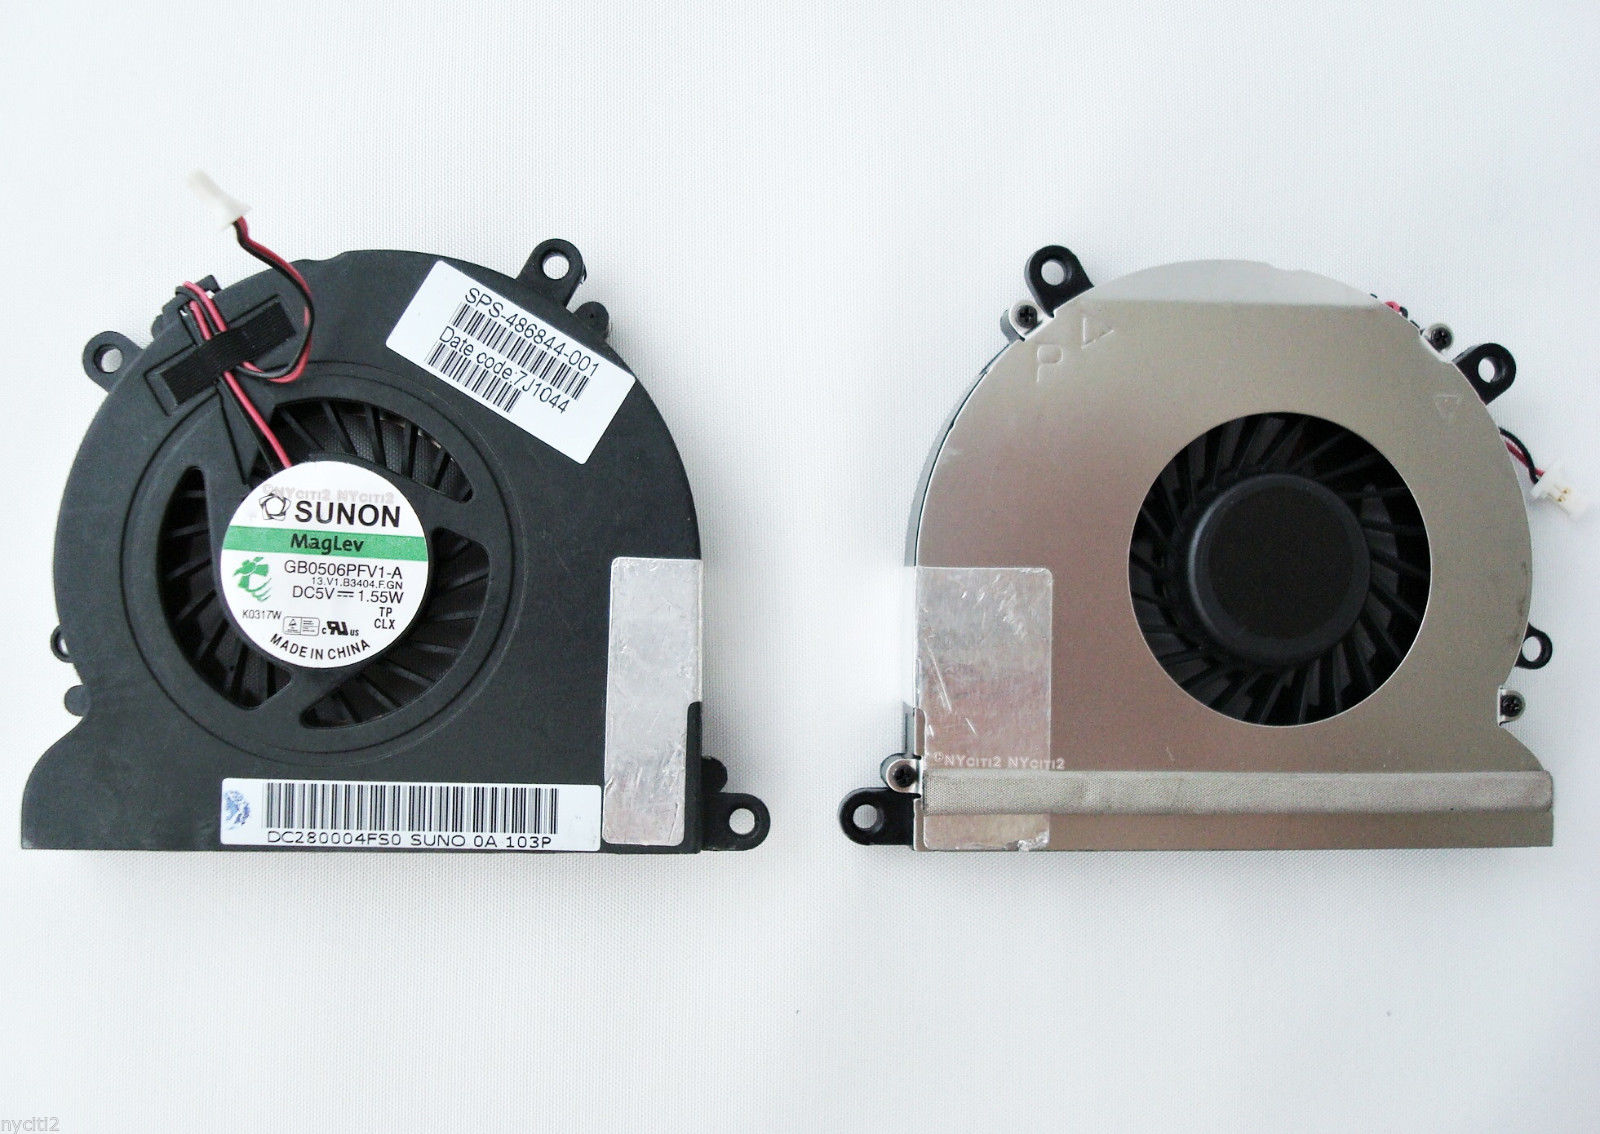 CPU Cooling Fan For HP Pavilion AB7205HX-GC1 JAL50 GB0506PFV1-A